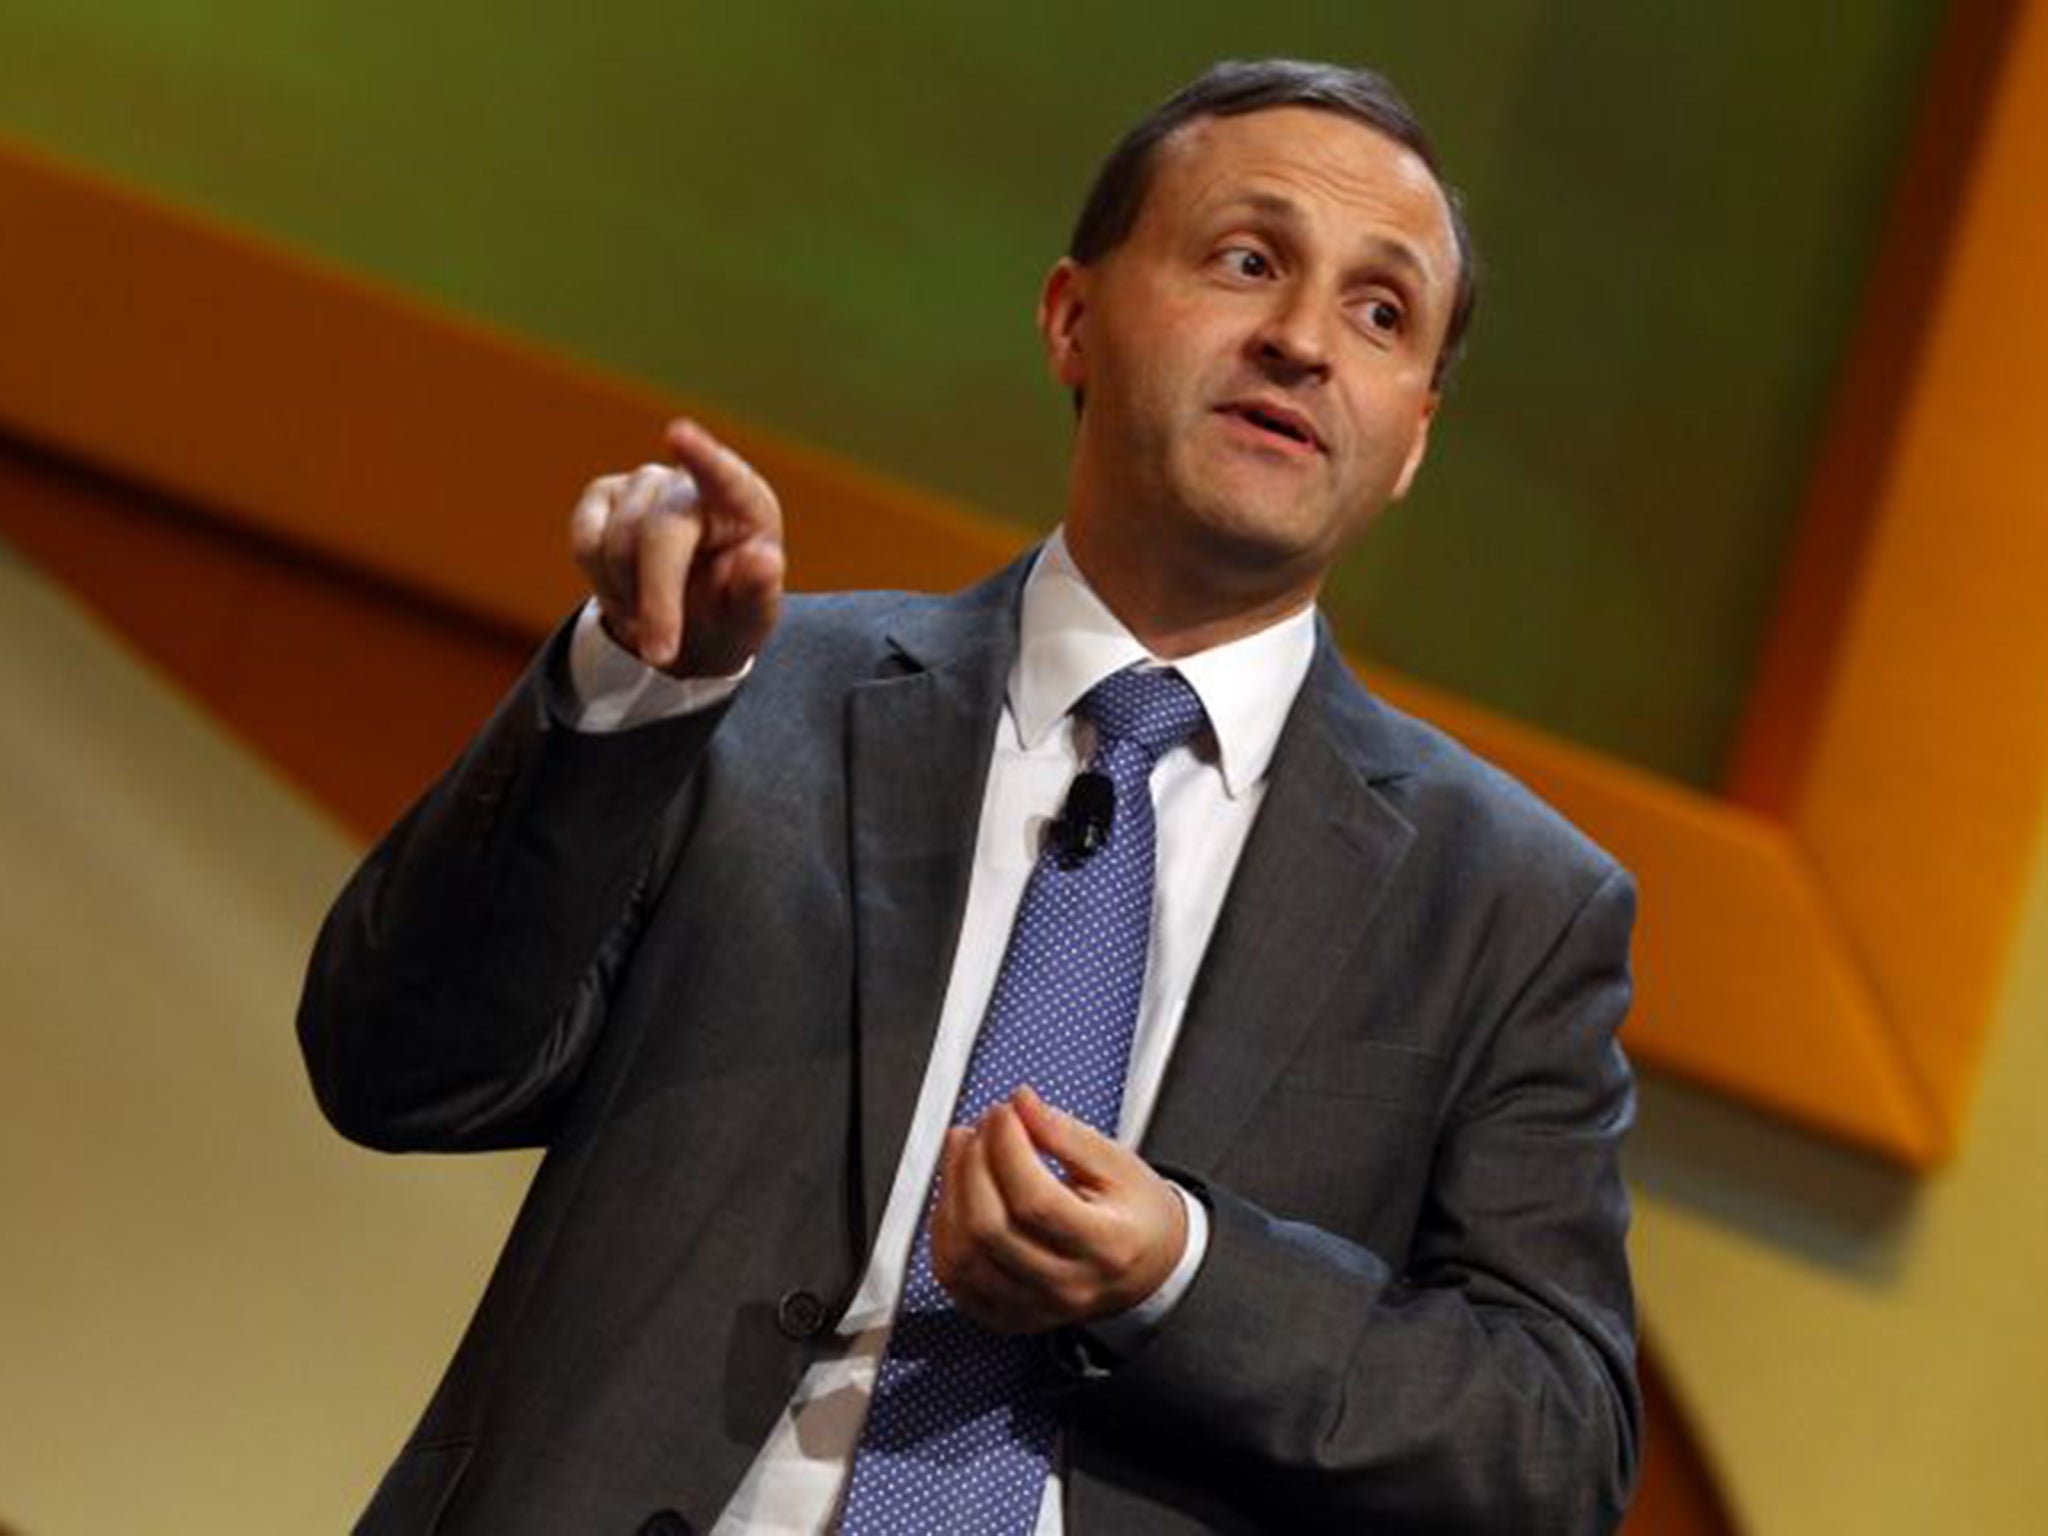 Steve Webb, has moved to assuage fears that new pensions' freedoms will leave savers open up to fraud